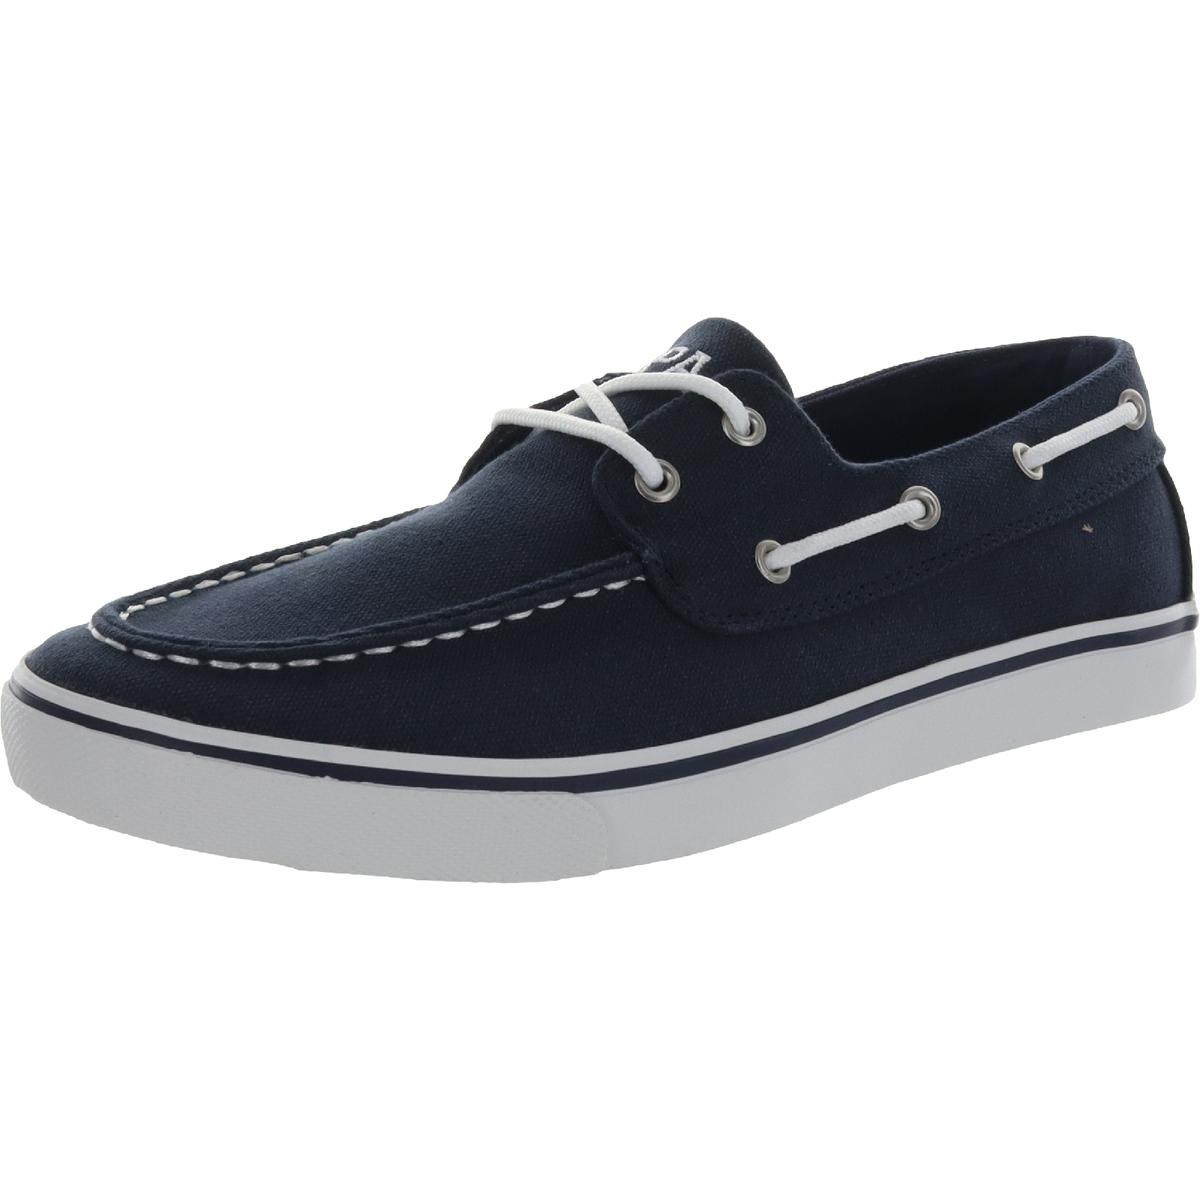 U.S. Polo Assn. Starboard Mens Canvas Slip-On Boat Shoes